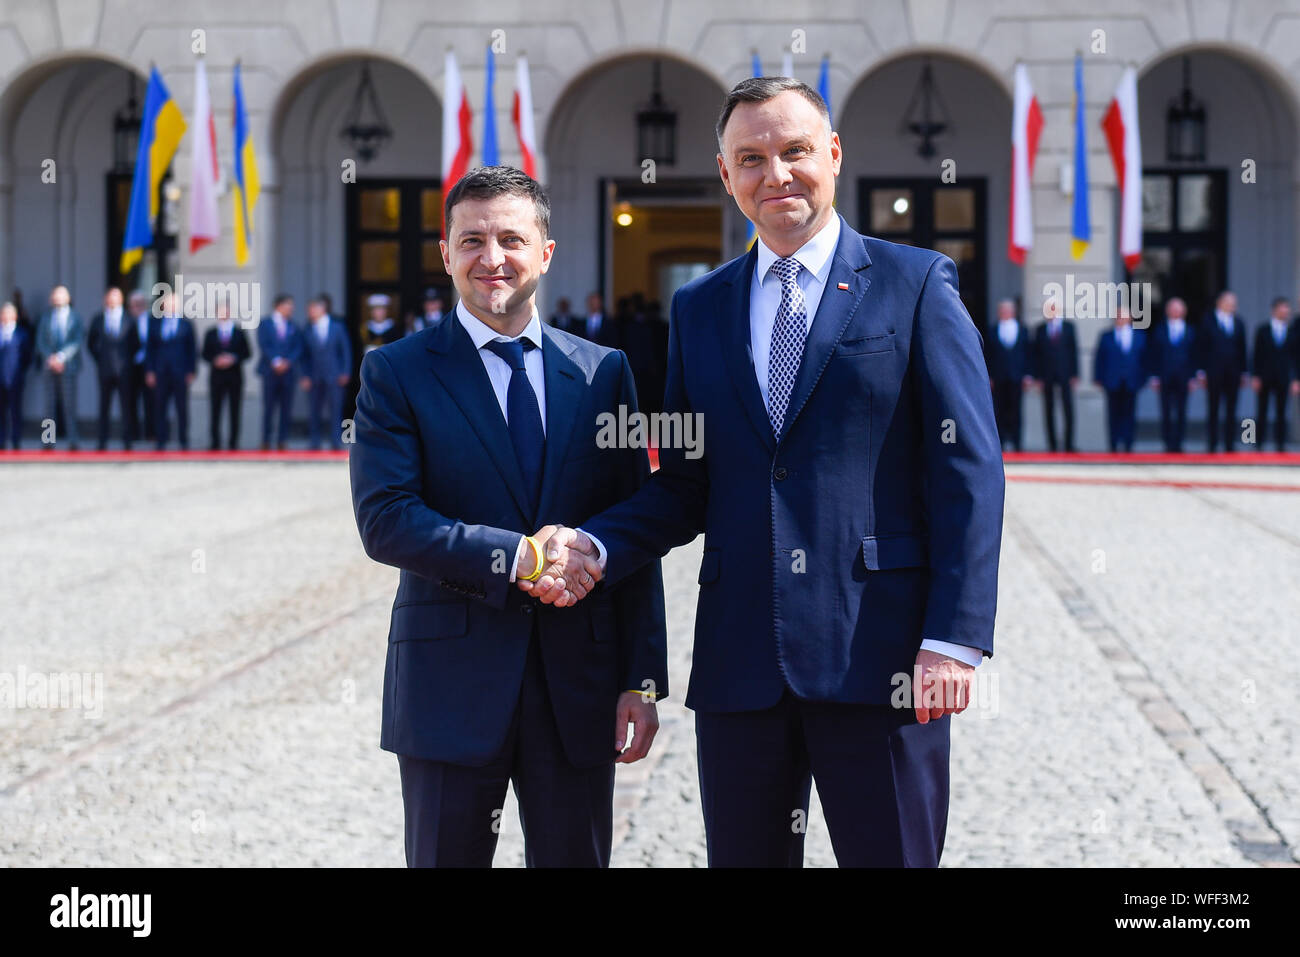 Warsaw, Poland. 31st Aug, 2019. President of Poland, Andrzej Duda and  President of Ukraine, Volodymyr Zelensky shake hands during a welcome  ceremony at the Presidential Palace. Volodymyr Zelensky arrives in Warsaw  ahead